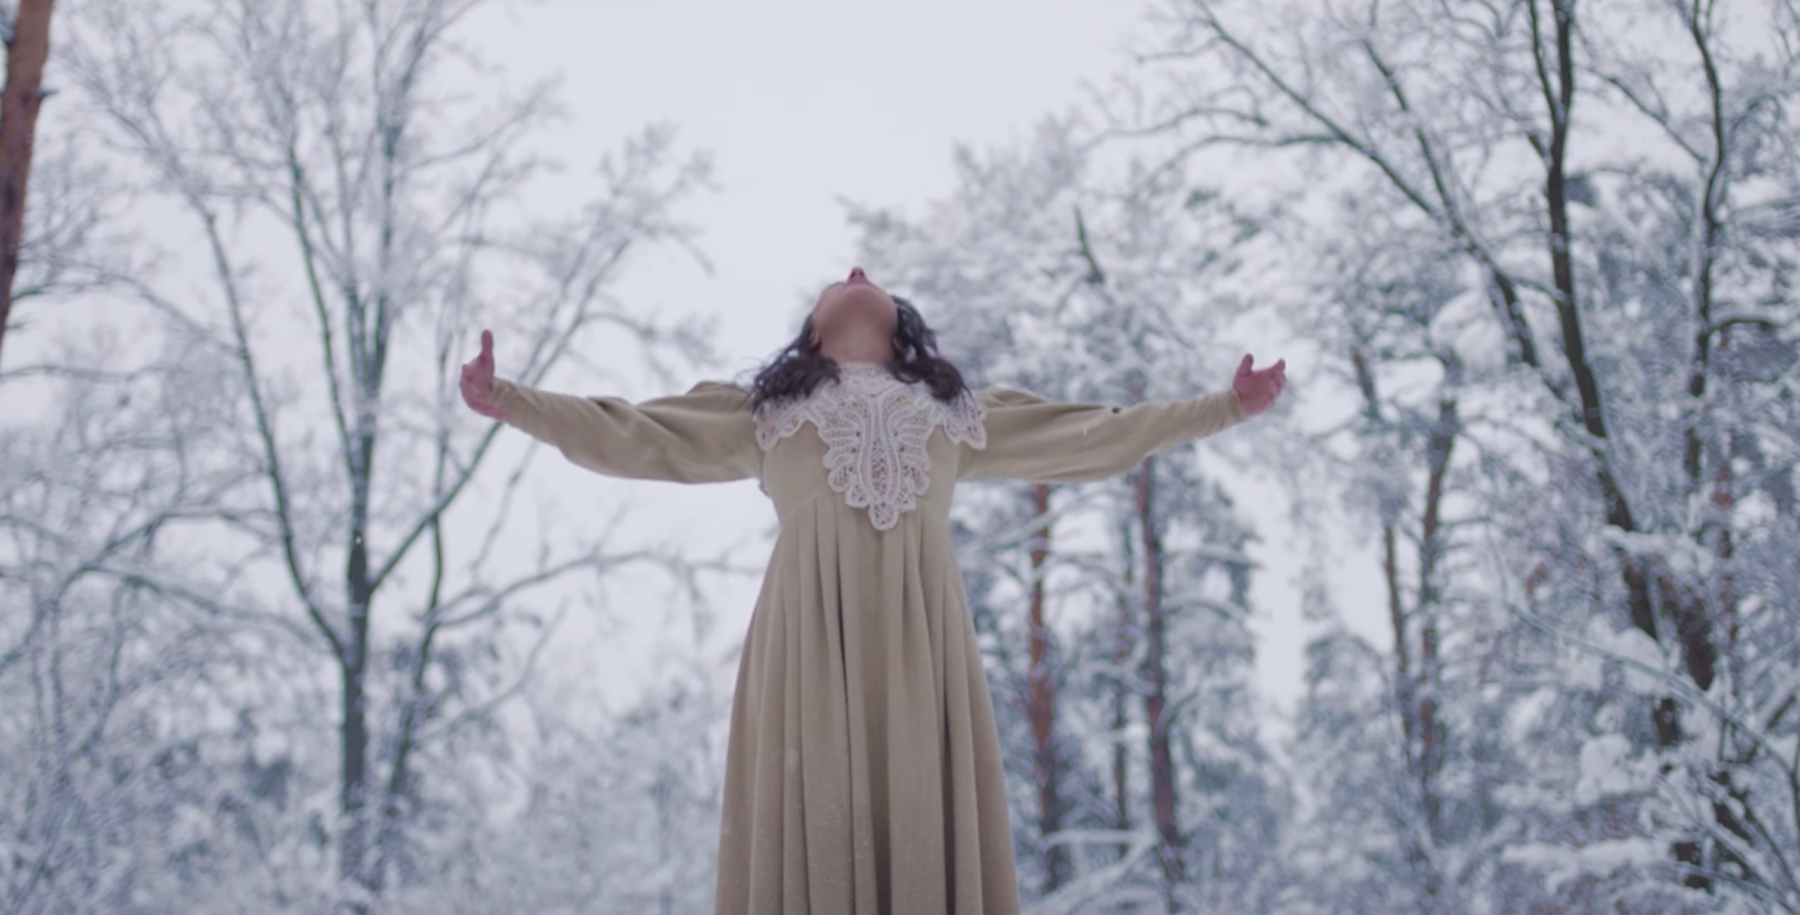 See Jinjer Dig Graves, Dance Through Snow in Haunting New 